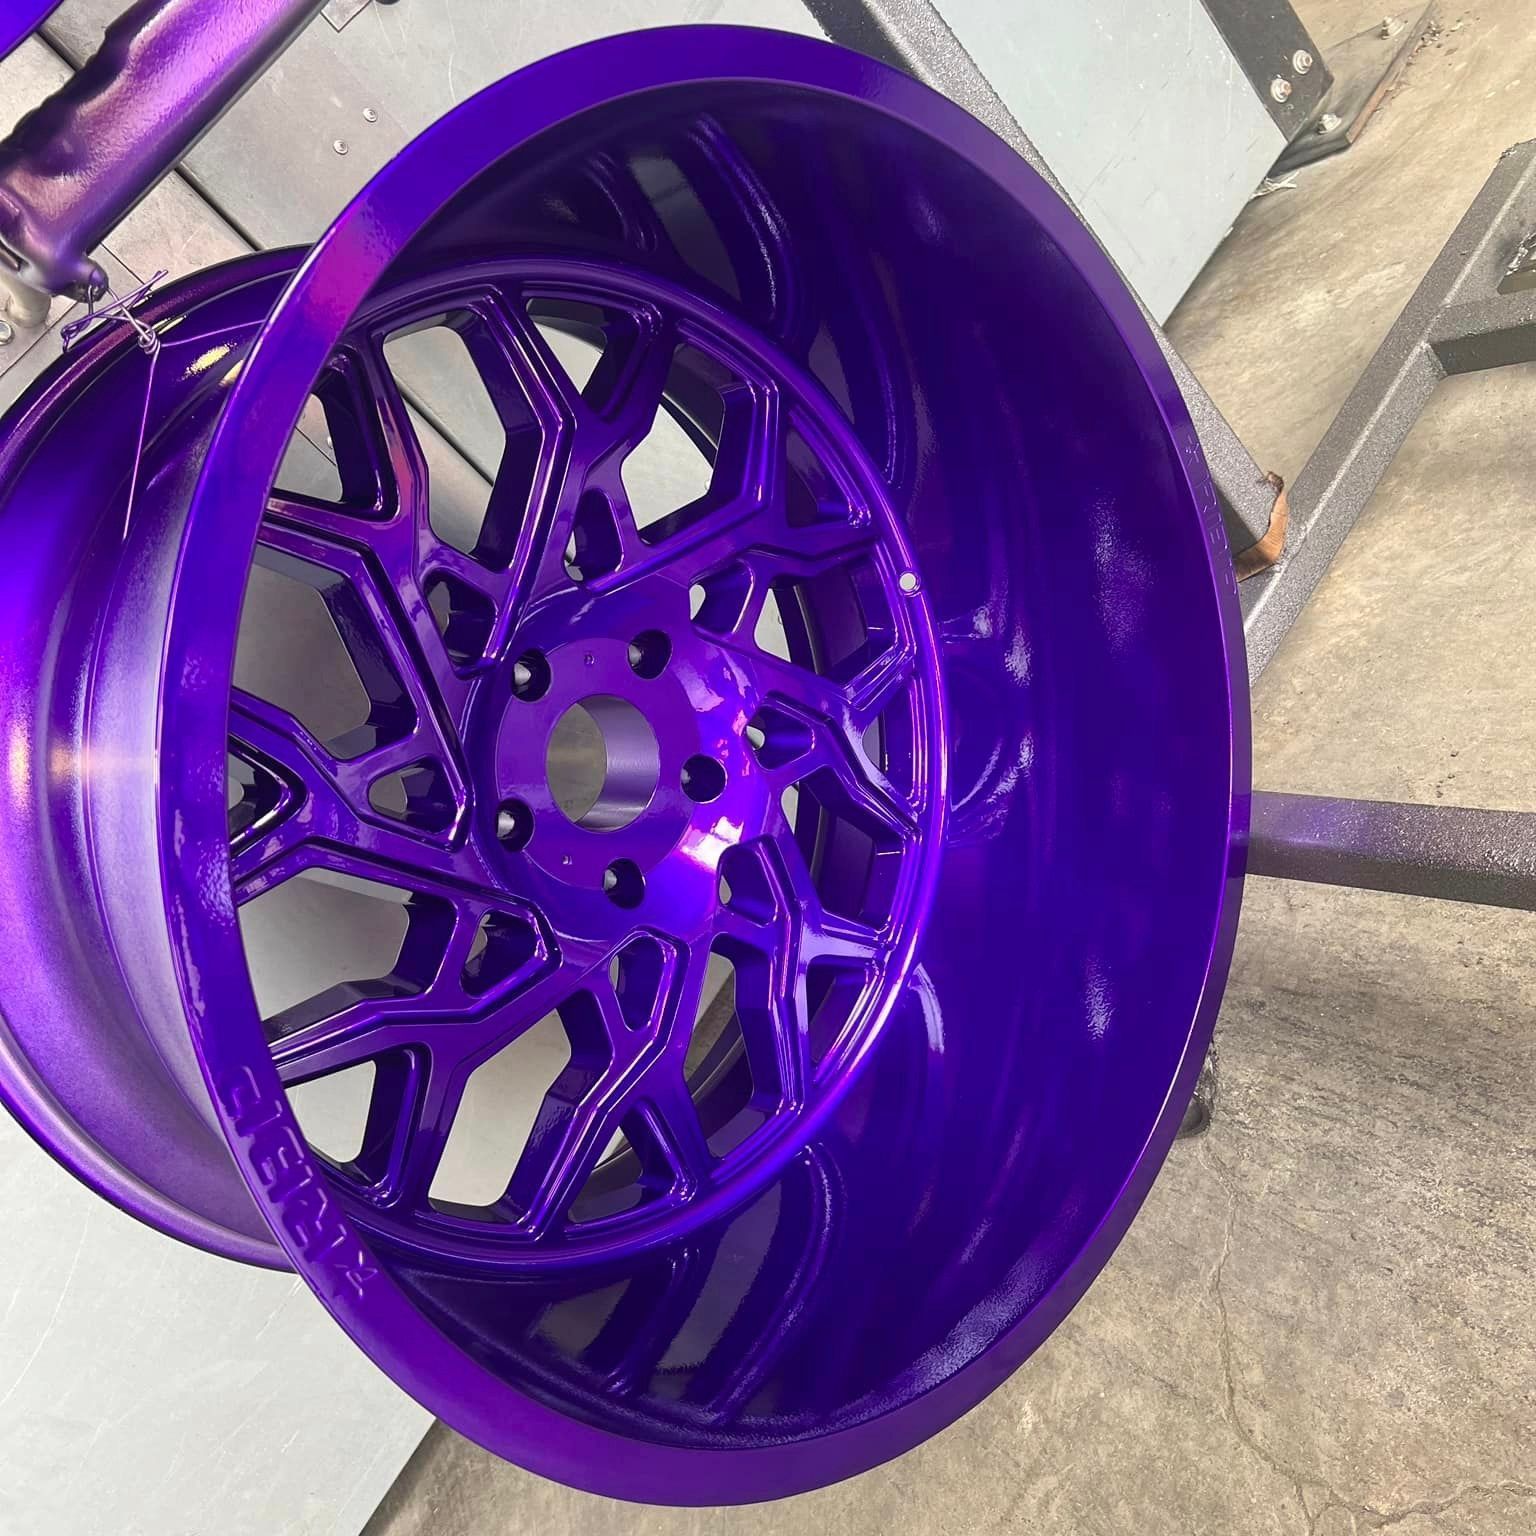 A purple wheel is sitting on a metal stand.